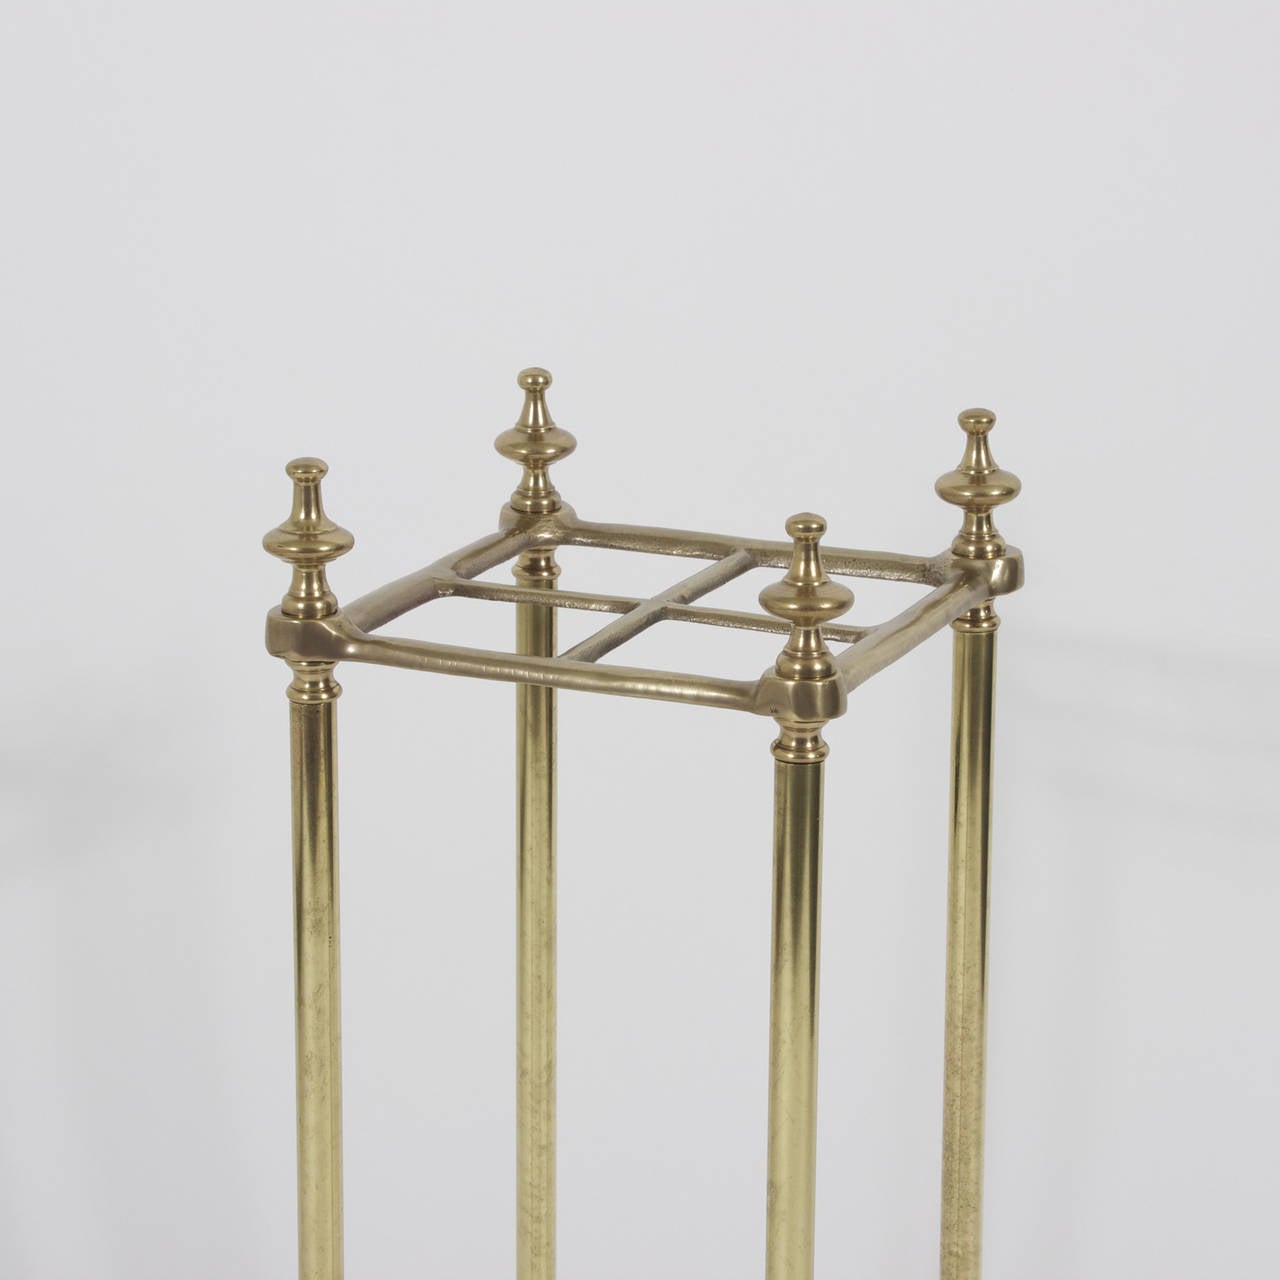 English Mid-Century Brass and Iron Cane or Umbrella Stand